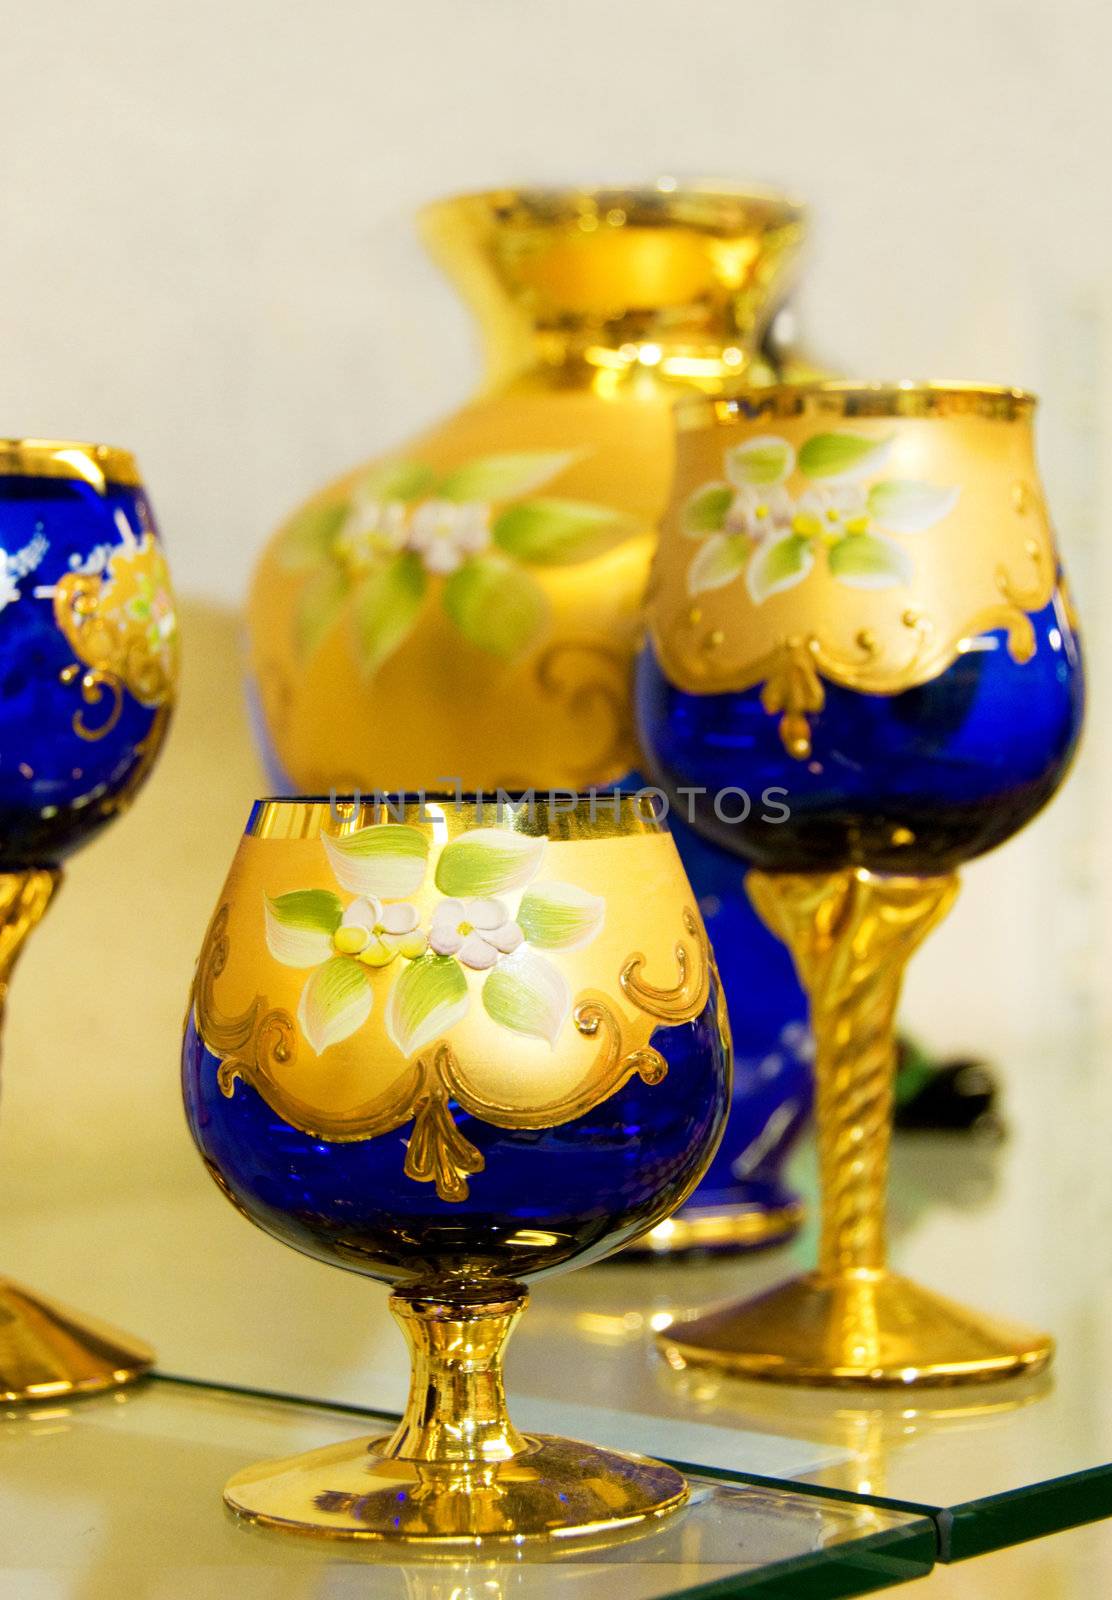 Transparent blue hand-made glass covered with gold drawing. Shallow depth-of-field